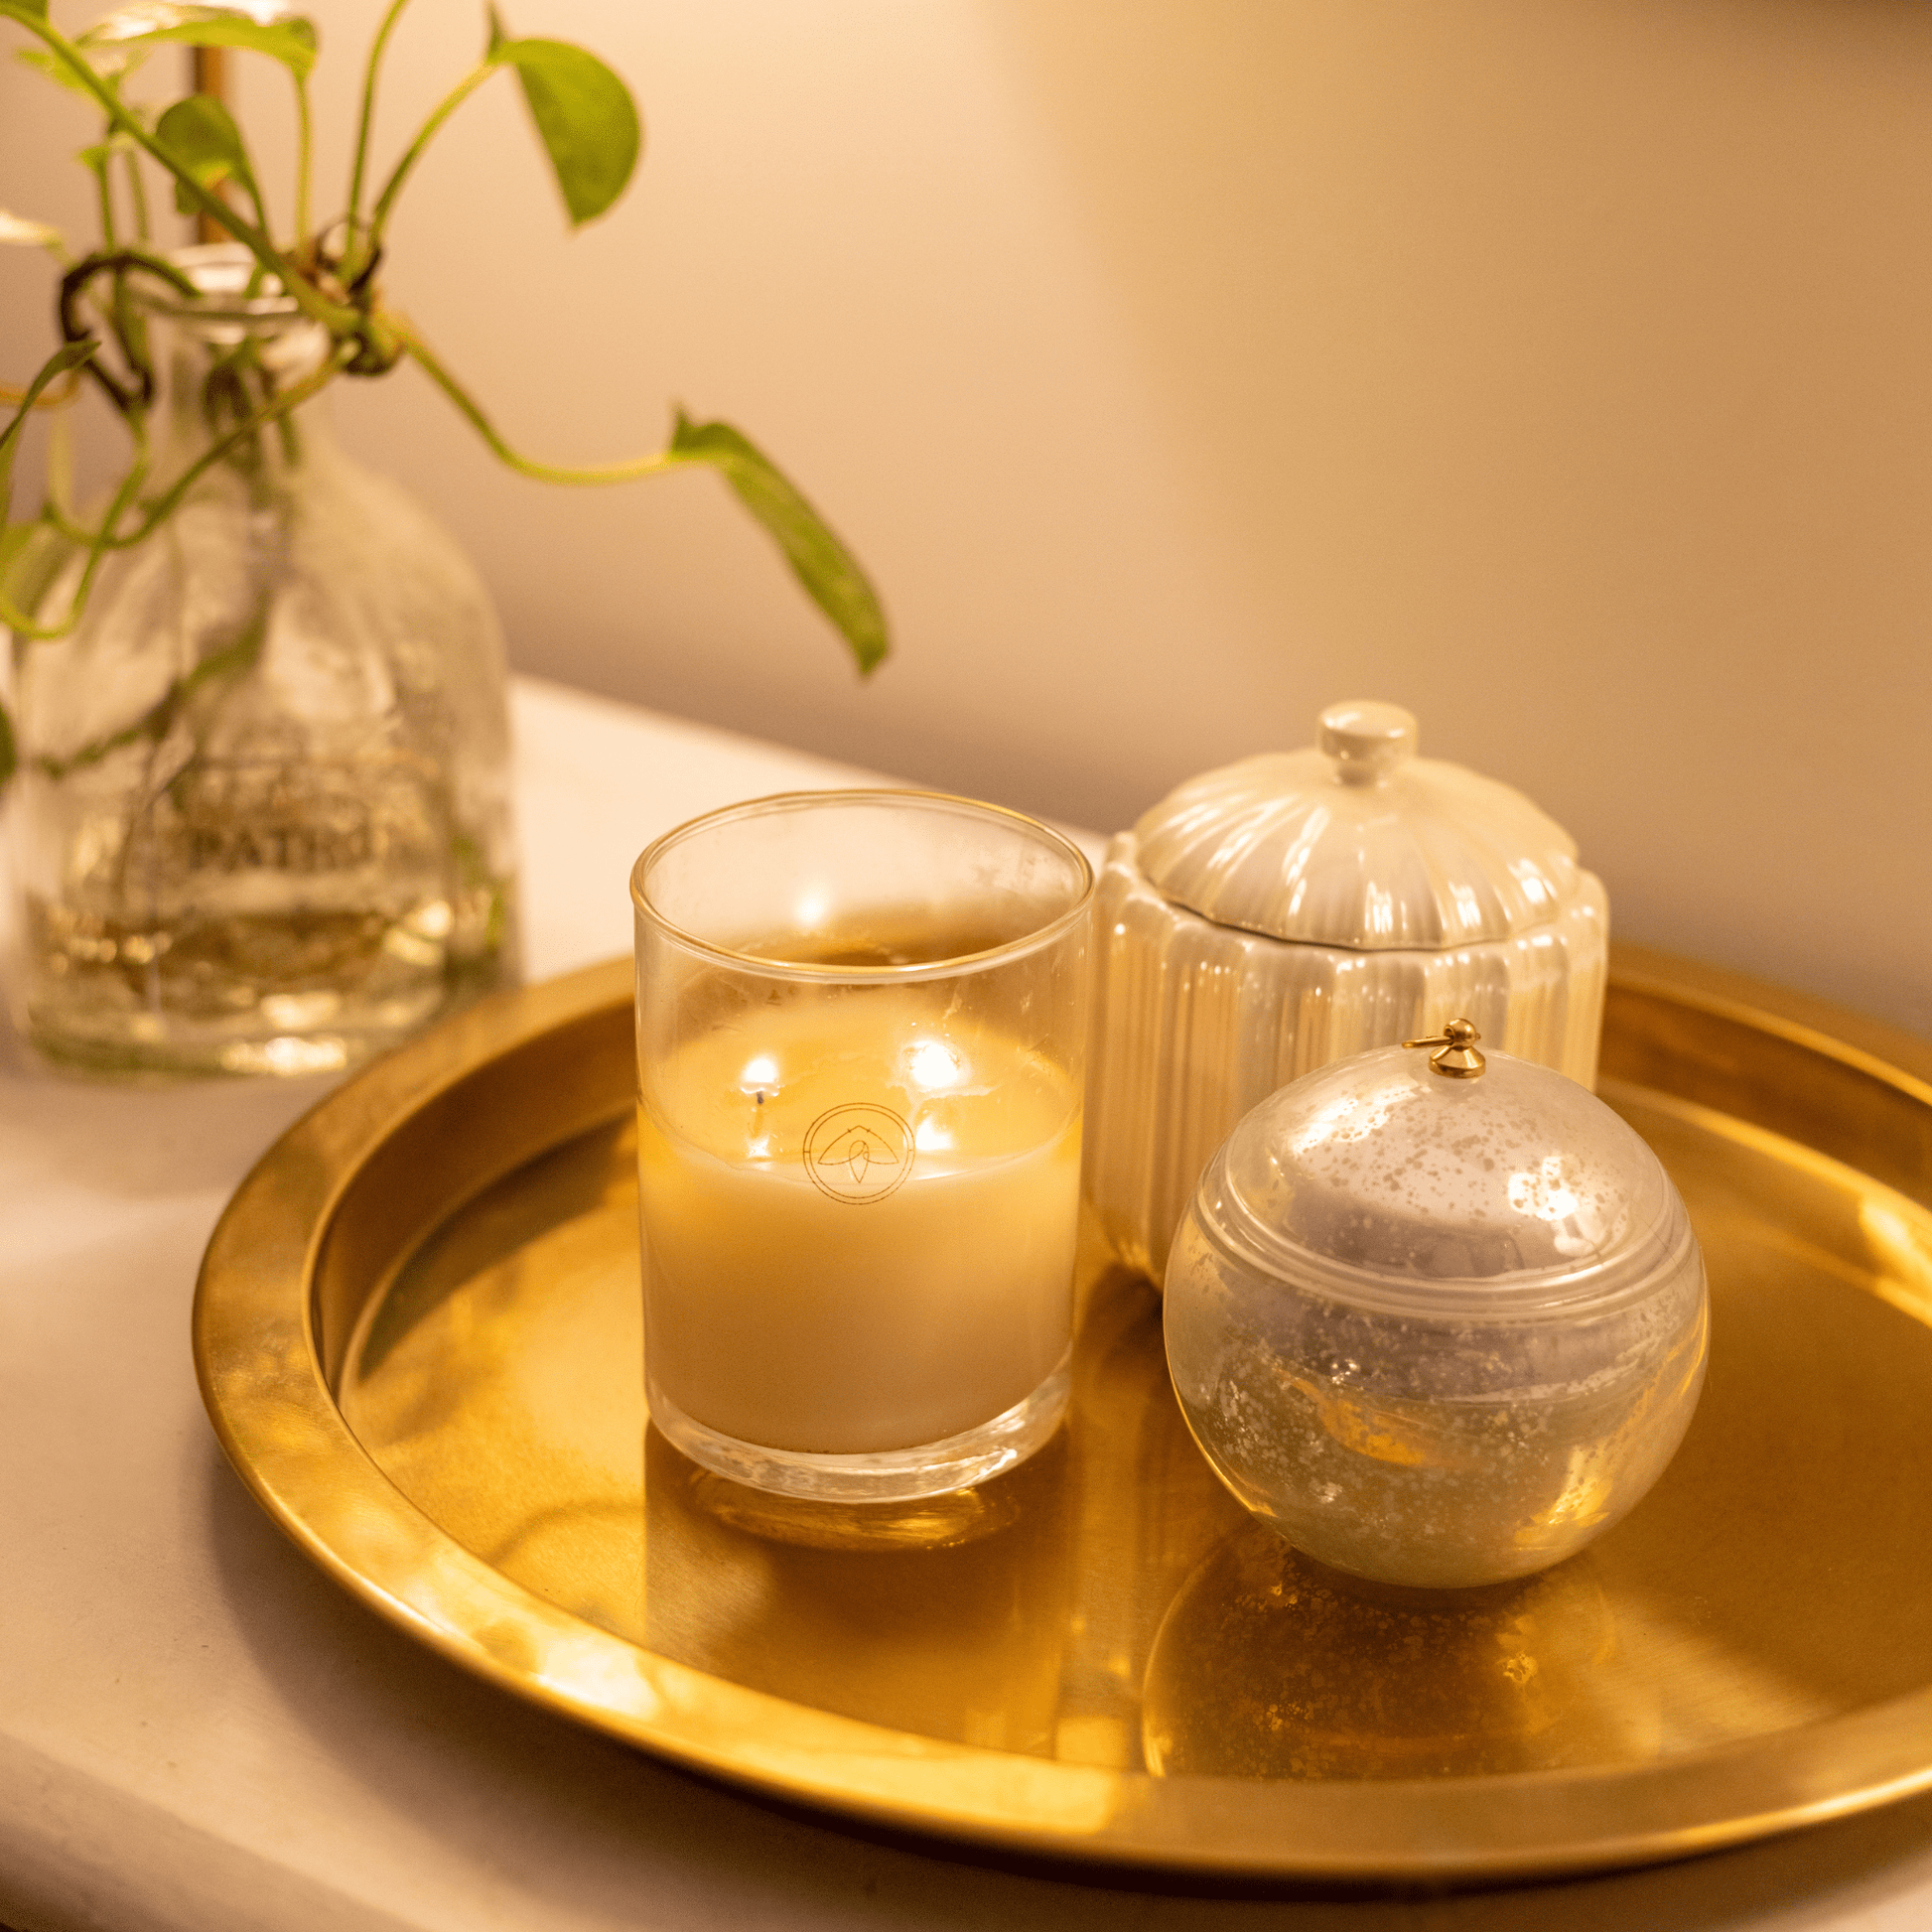 10oz Clarity two wick candle on gold metal tray with home decor and a planter in the background